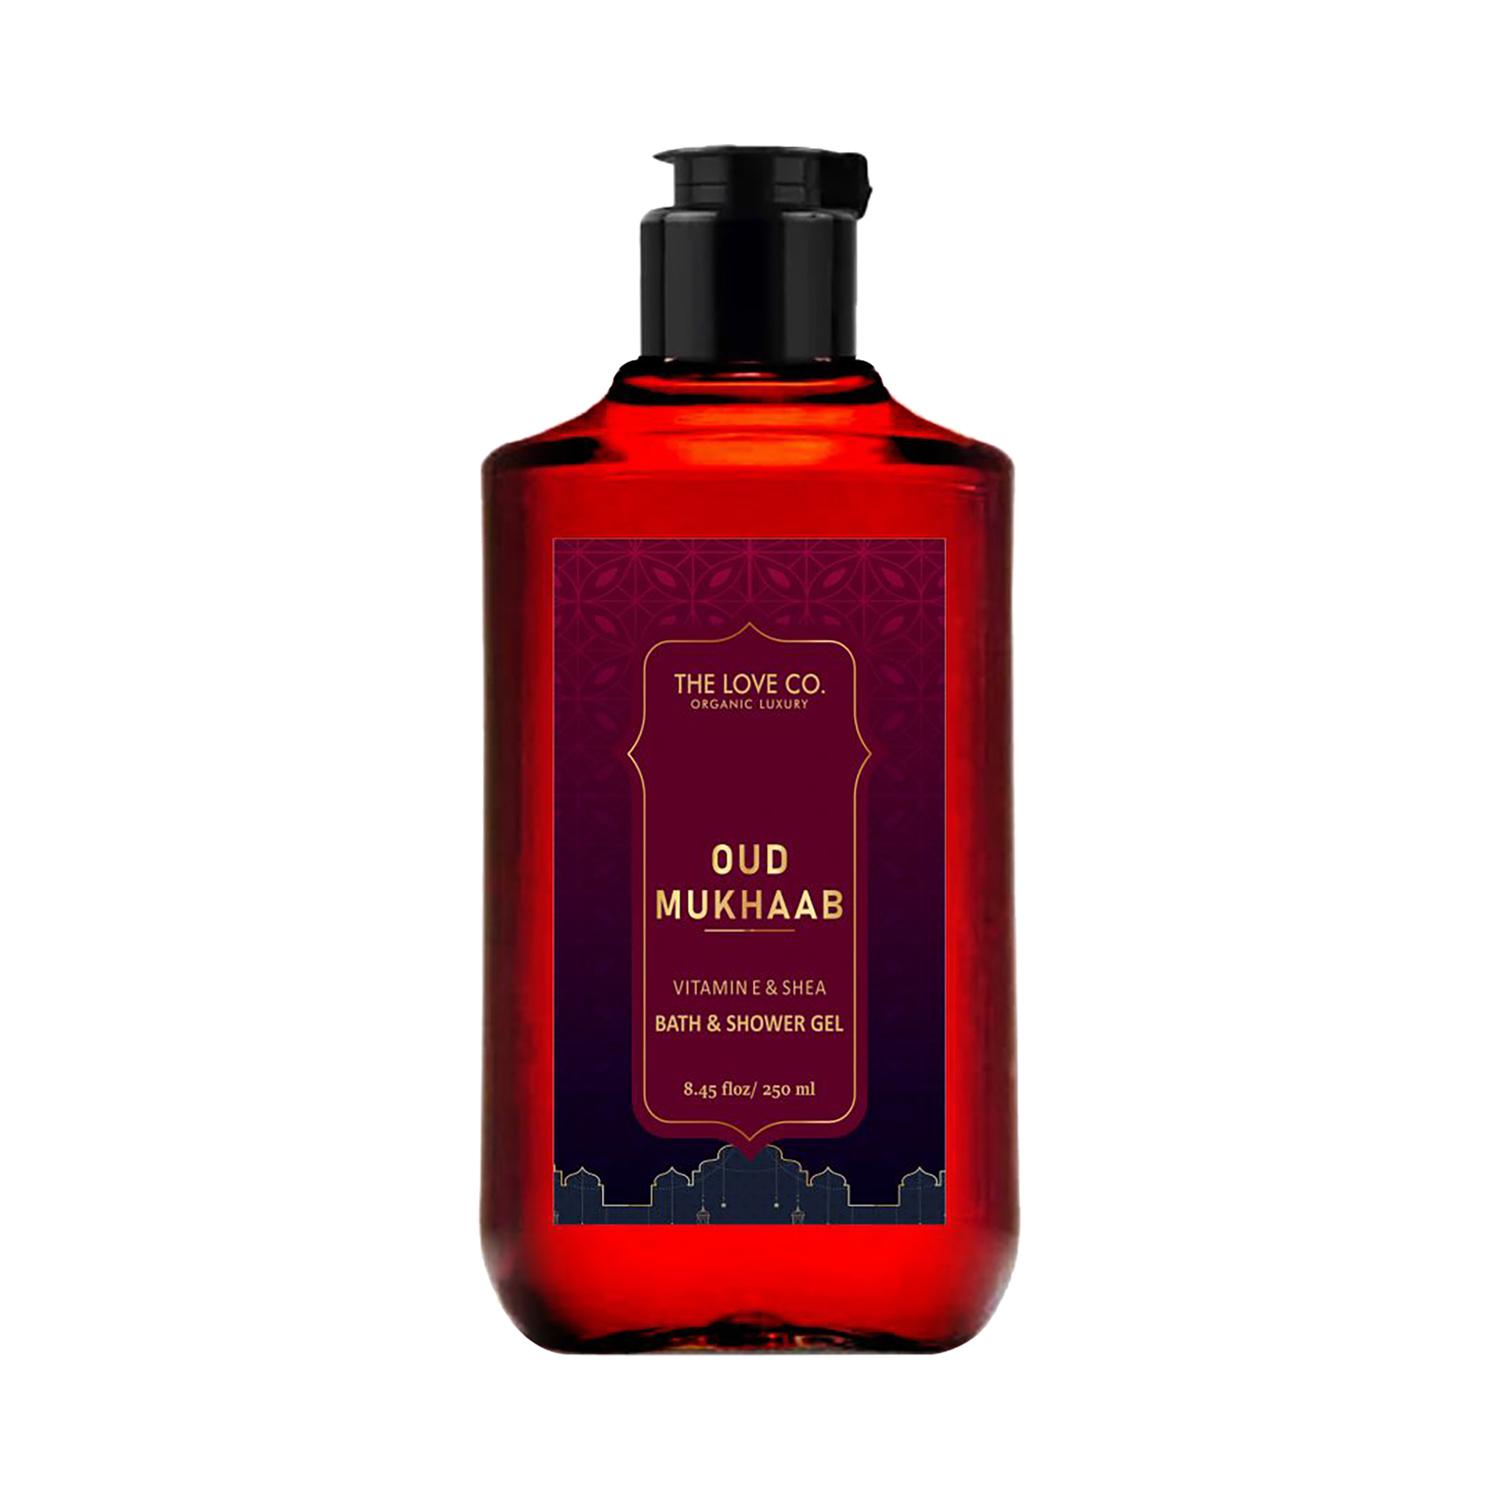 THE LOVE CO. | THE LOVE CO. Oud Mukhaab Bath and Shower Gel (250ml)